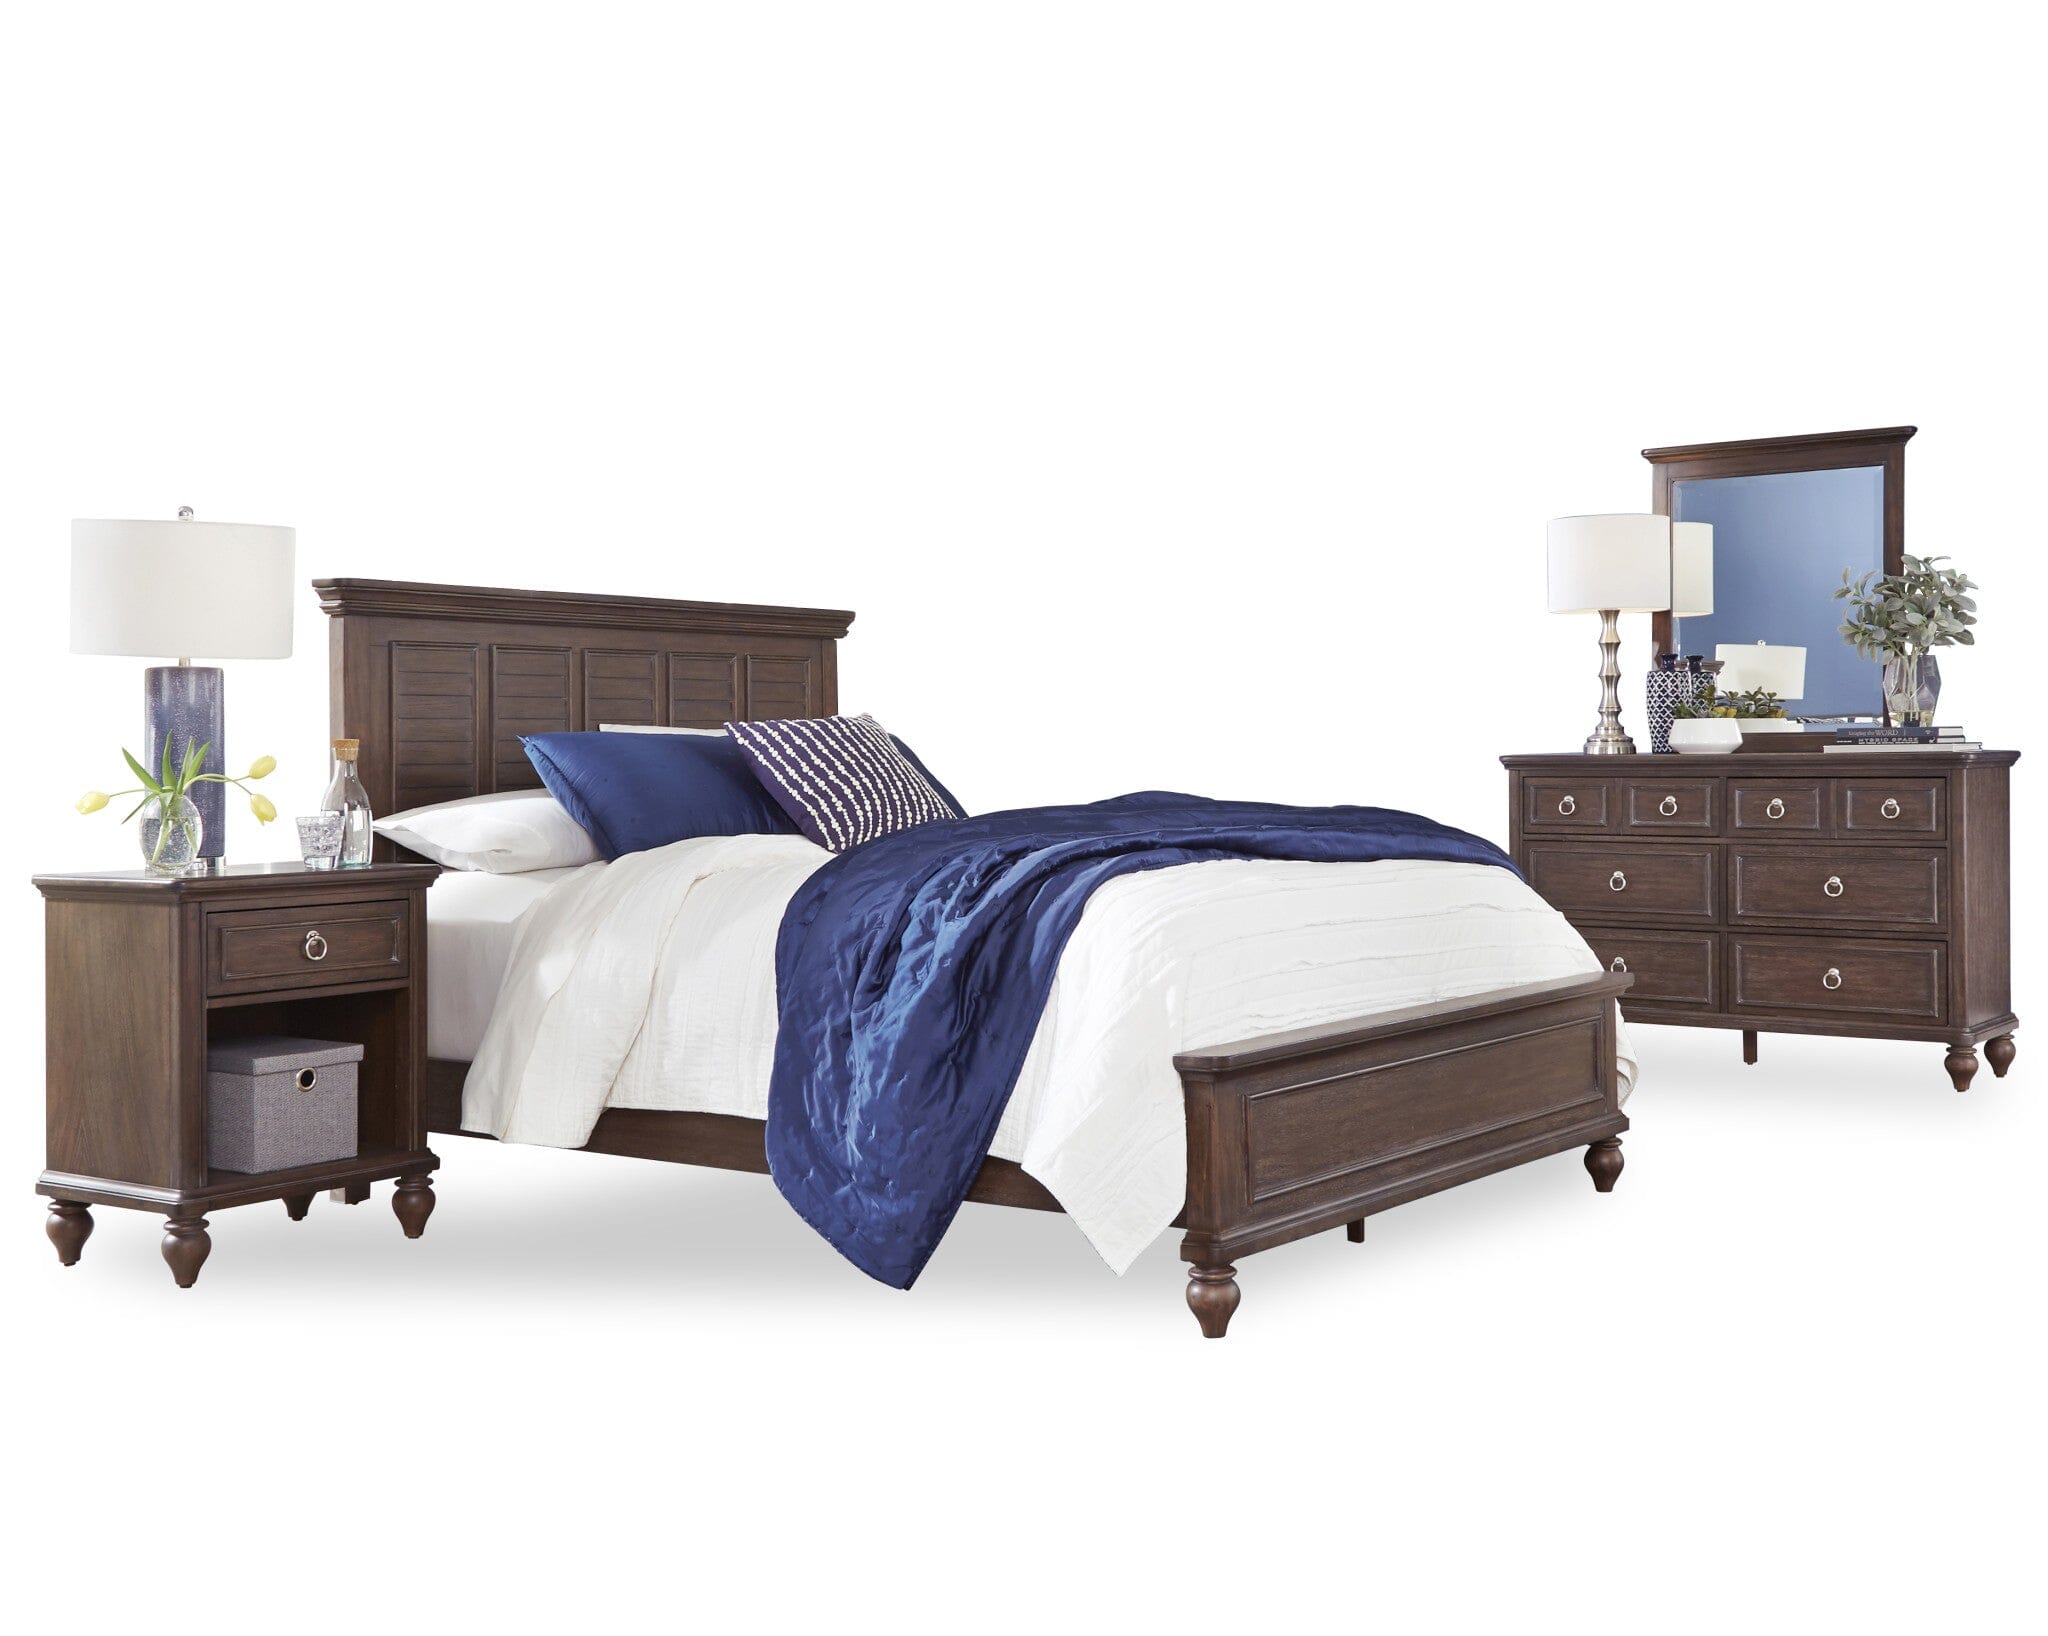 Coastal Queen Bed, Nightstand and Dresser with Mirror By Southport Queen Bedroom Set Southport